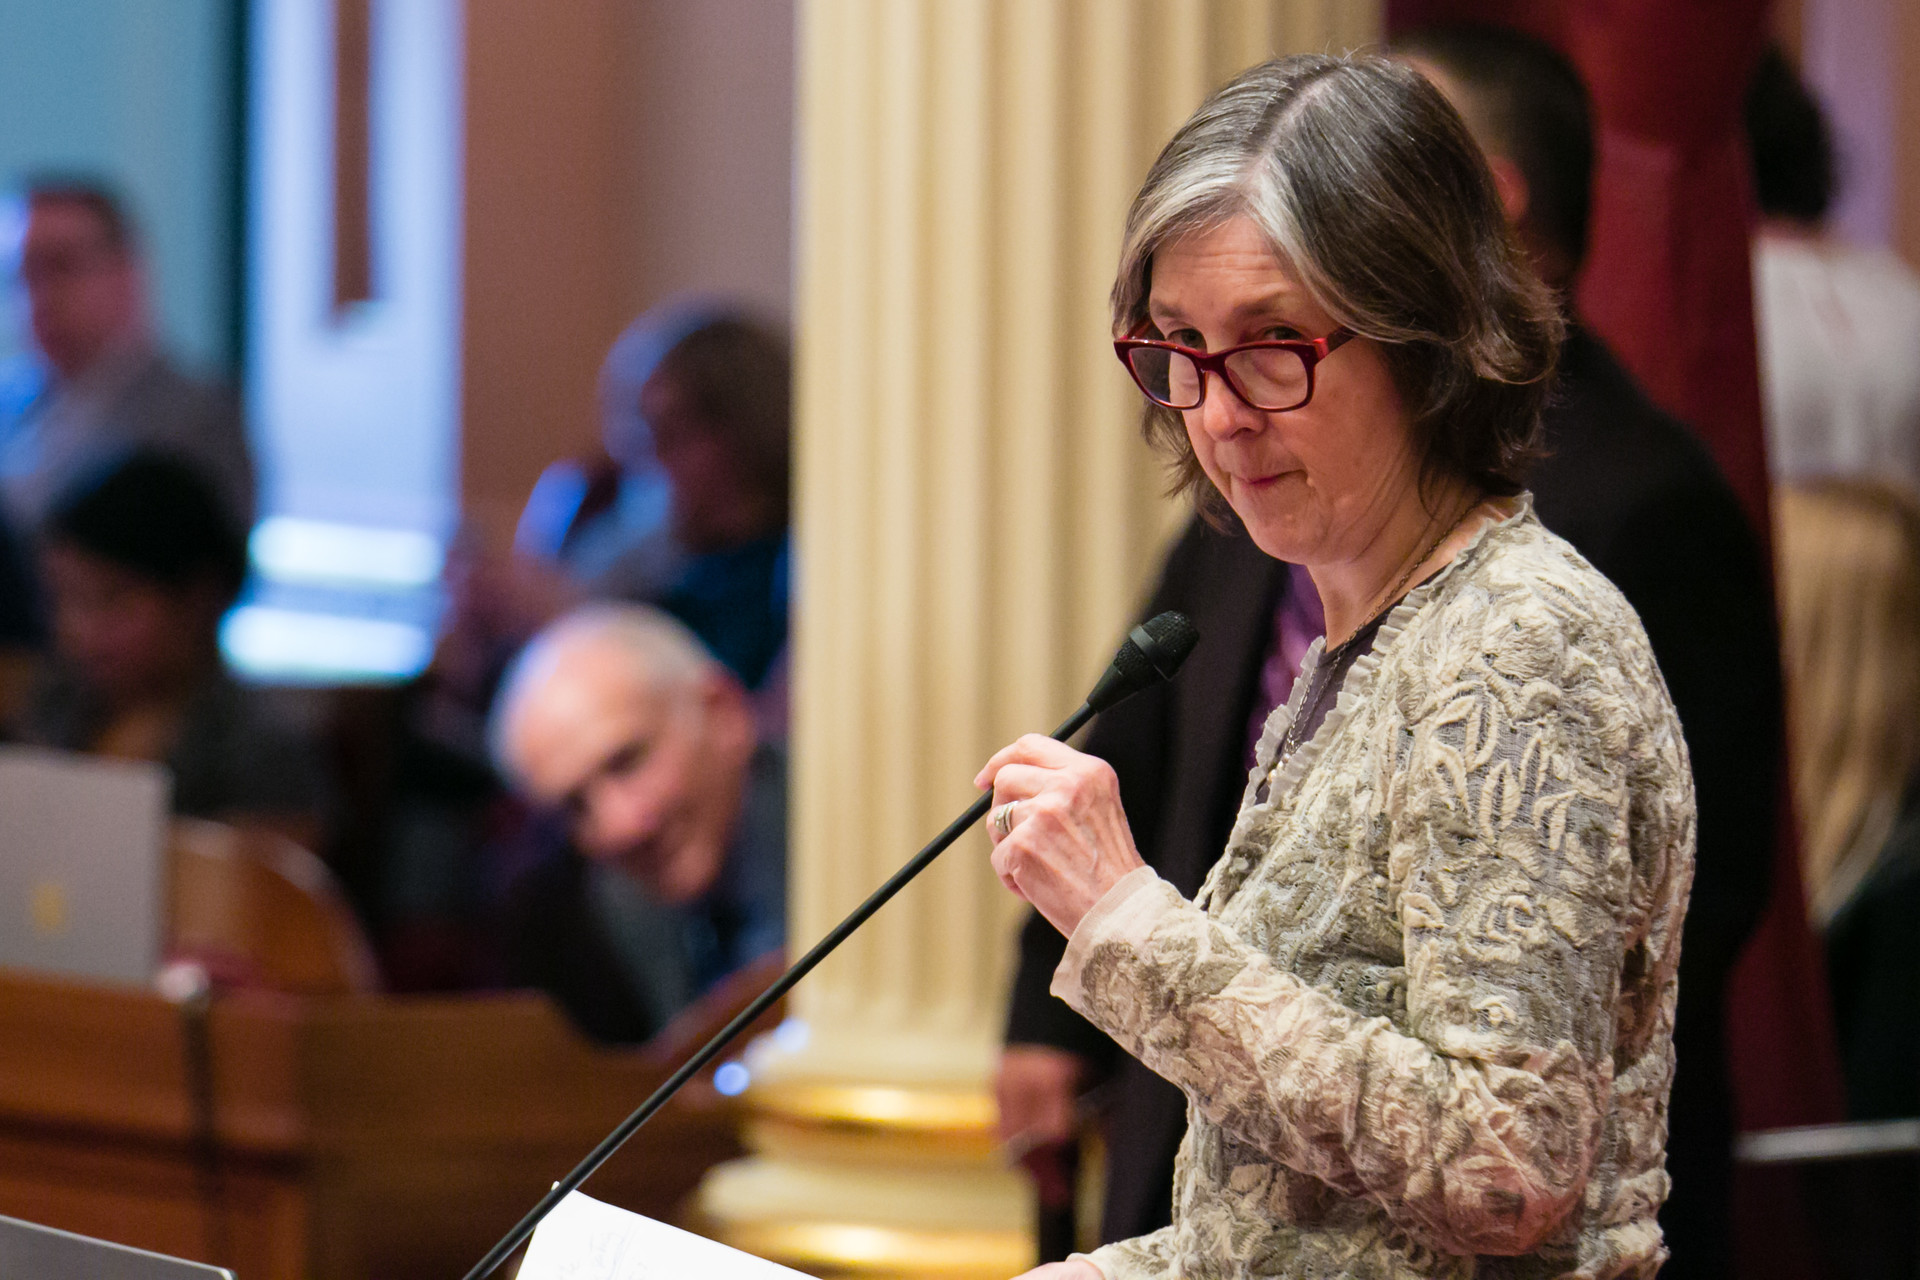 A white woman in business attire, eyeglasses and short, graying brown hair talks from a lectern inside a California government building.